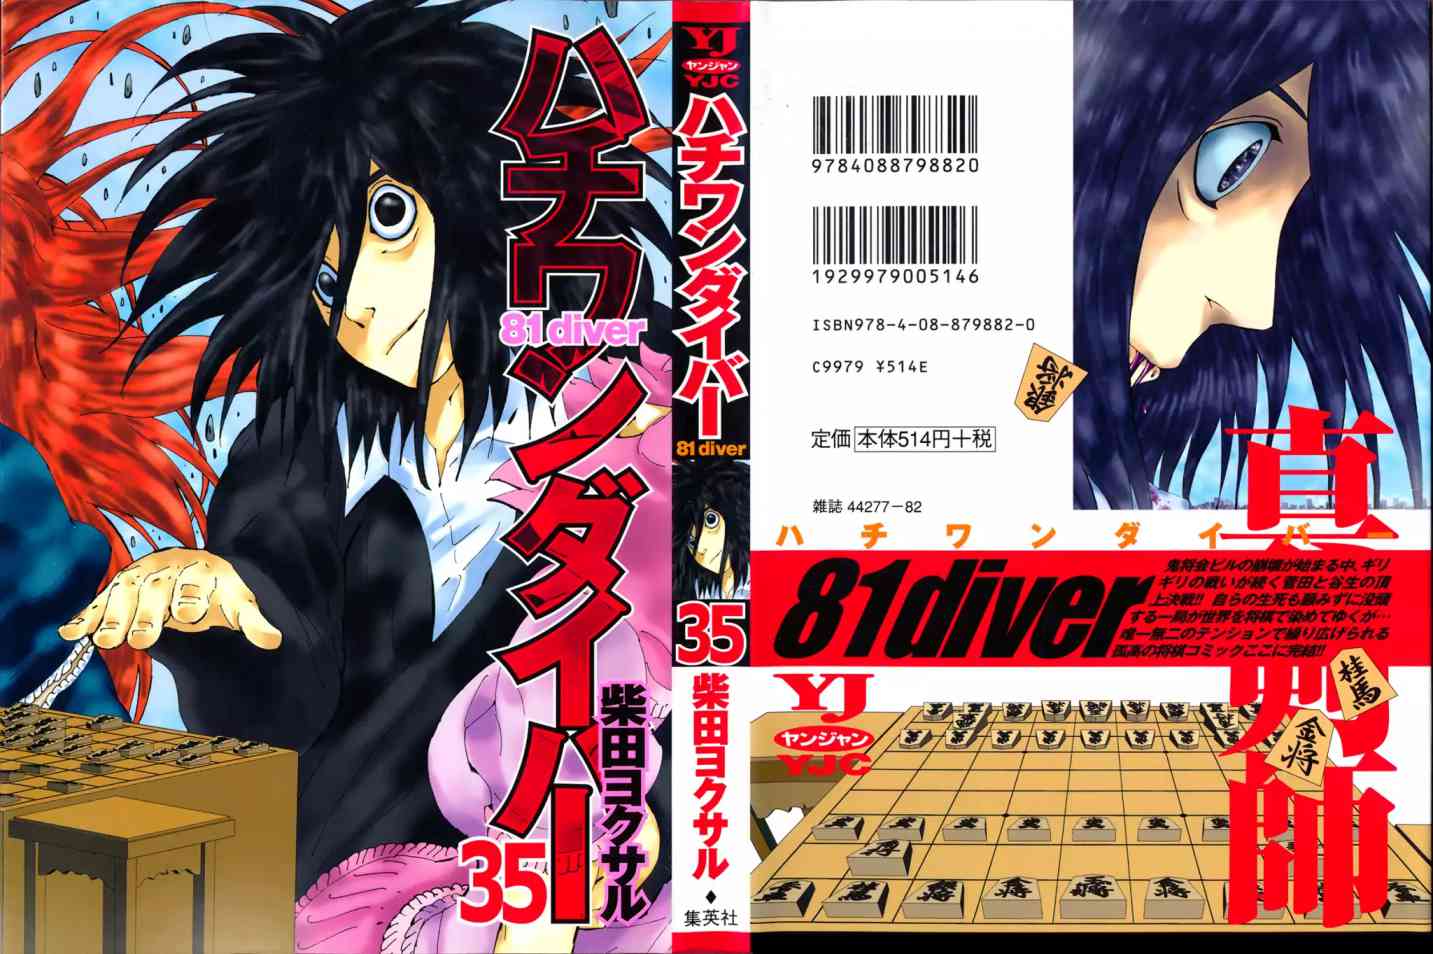 81 Diver Chapter 365 Page 1